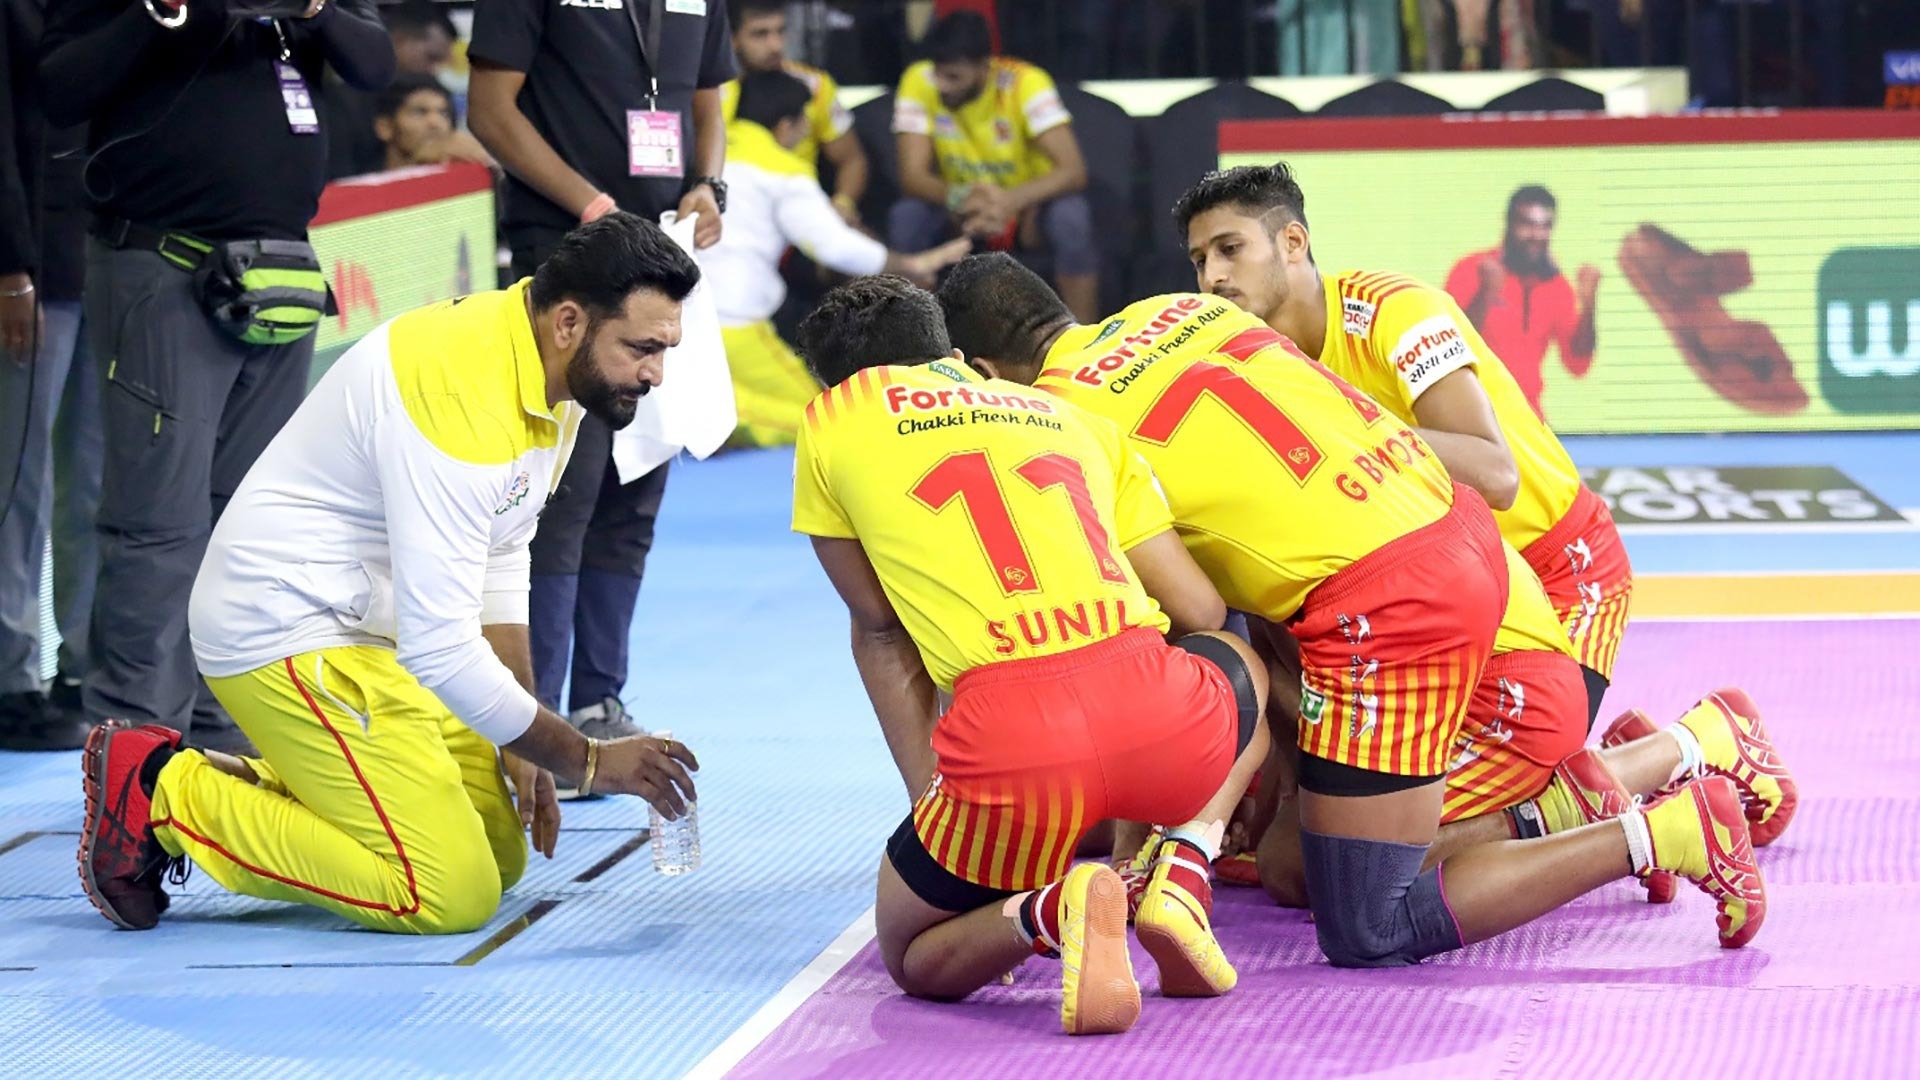 PKL 2019 | Gujarat will not only qualify for playoffs but also play the final, believes Manpreet Singh